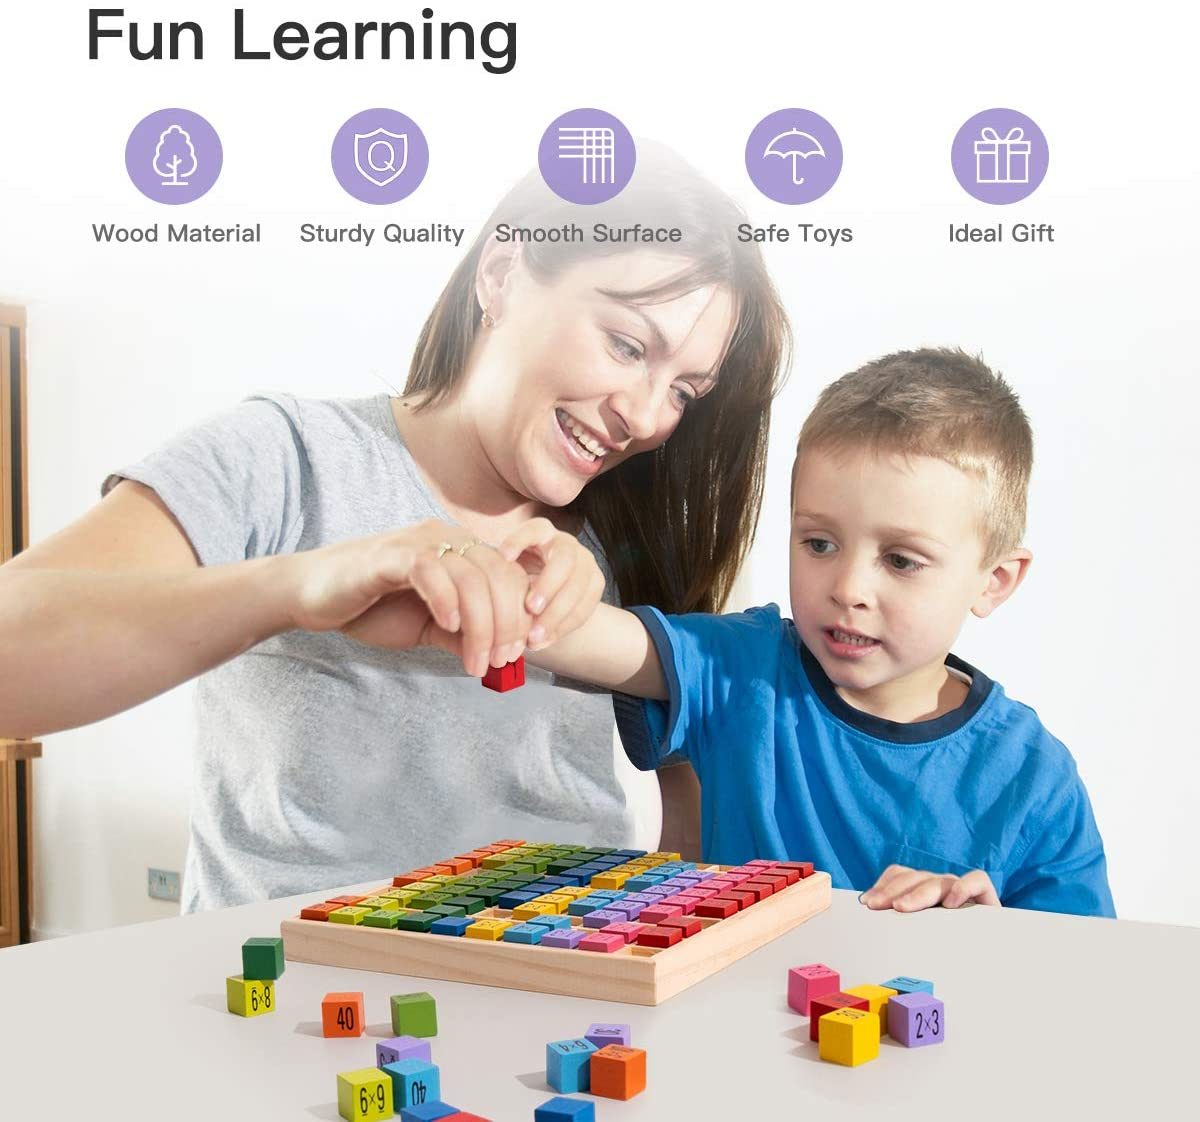 An educational toy with the Wooden Multiplication & Math Table Board Game, Kids Montessori Preschool Learning Toys Gift for Toddlers Aged 3 Years Old and Up - 100 Counting Wooden Building Blocks.